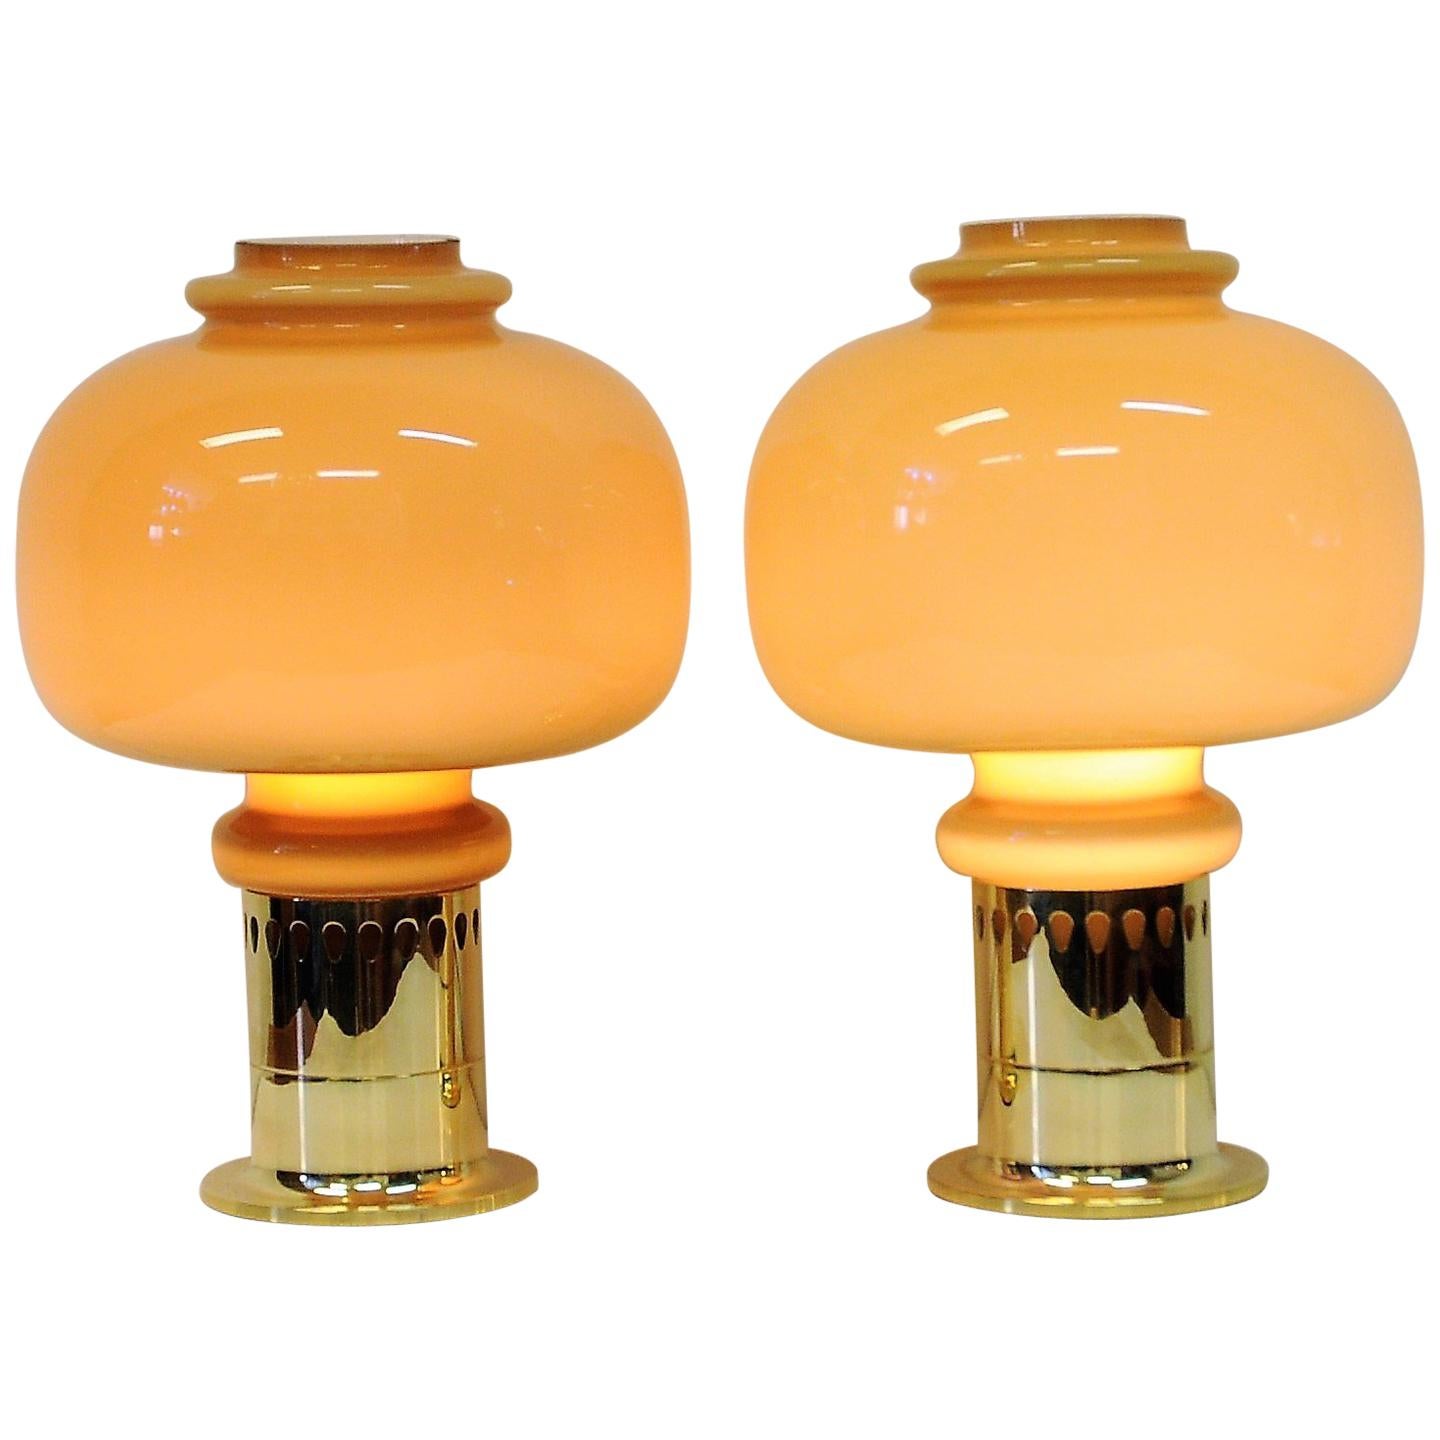 Pair of Glass and Brass Table Lamps 1960s with Brown Glass Shades by Haj, Sweden